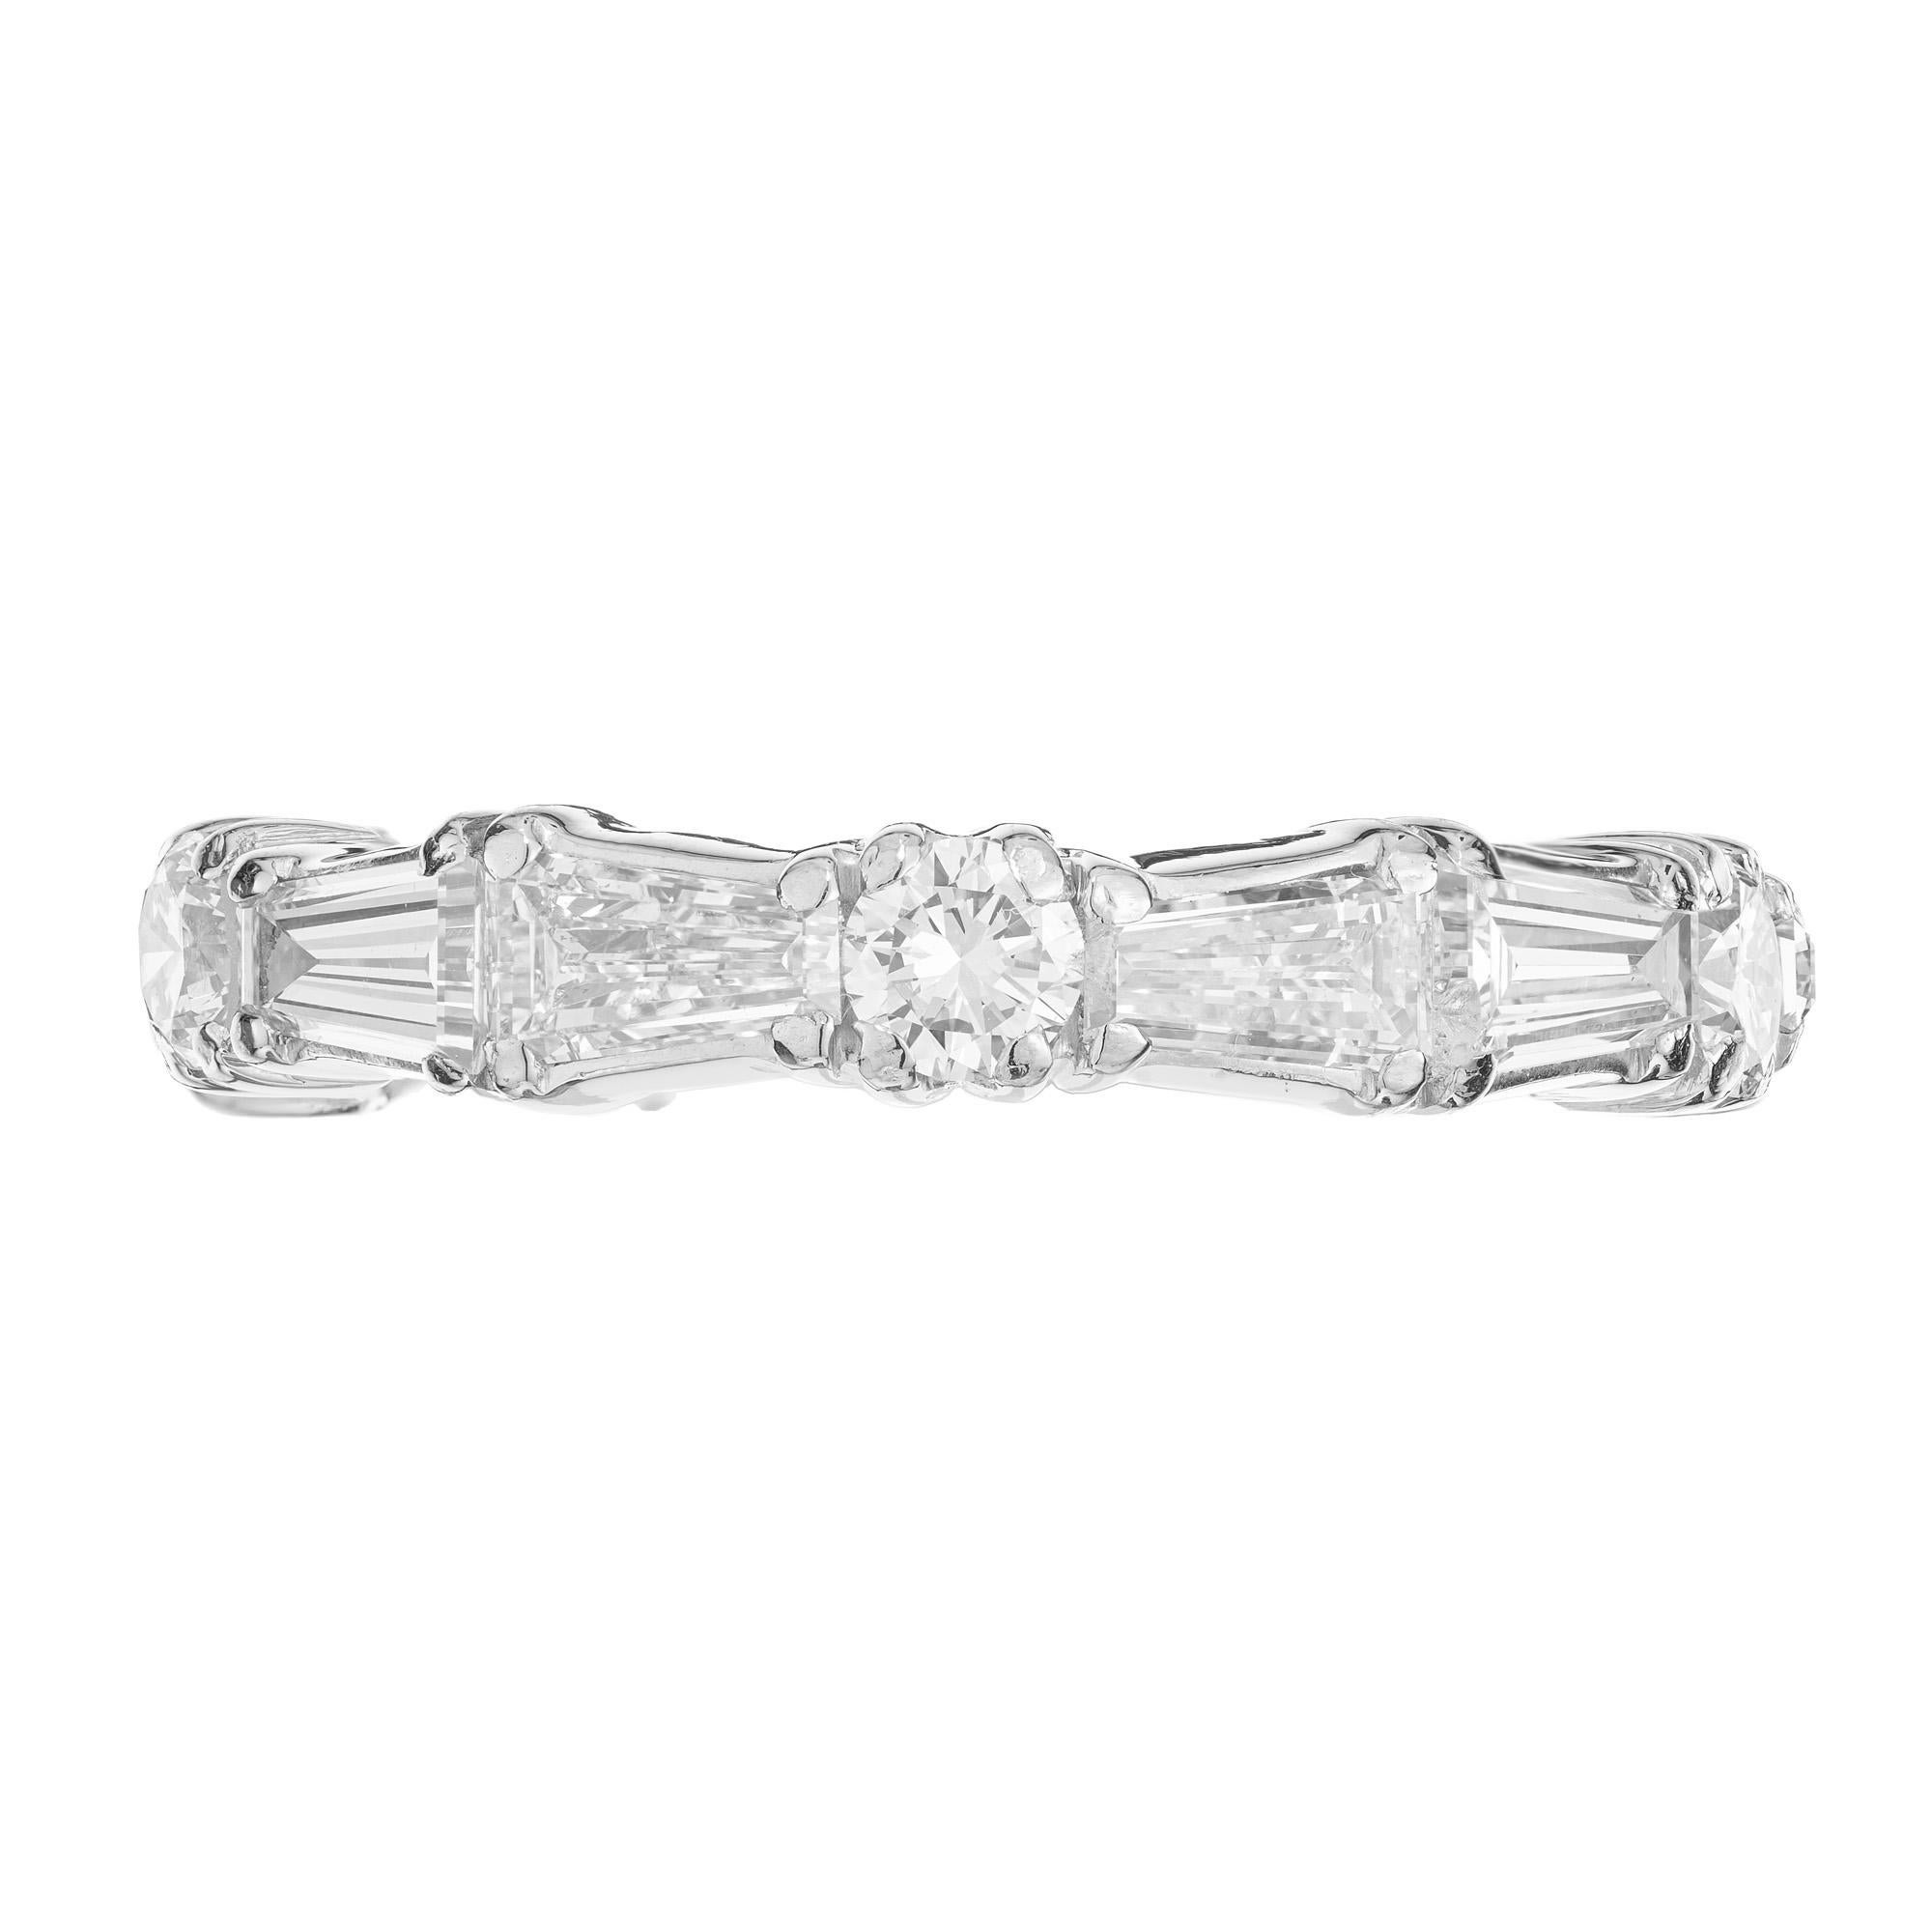 Custom made and custom design diamond platinum wedding band ring. This ring is set with ten tapered baguettes diamonds in a pair pattern that are separated by 5 round brilliant cut diamonds. While this ring is not easily sizable, it can be ordered